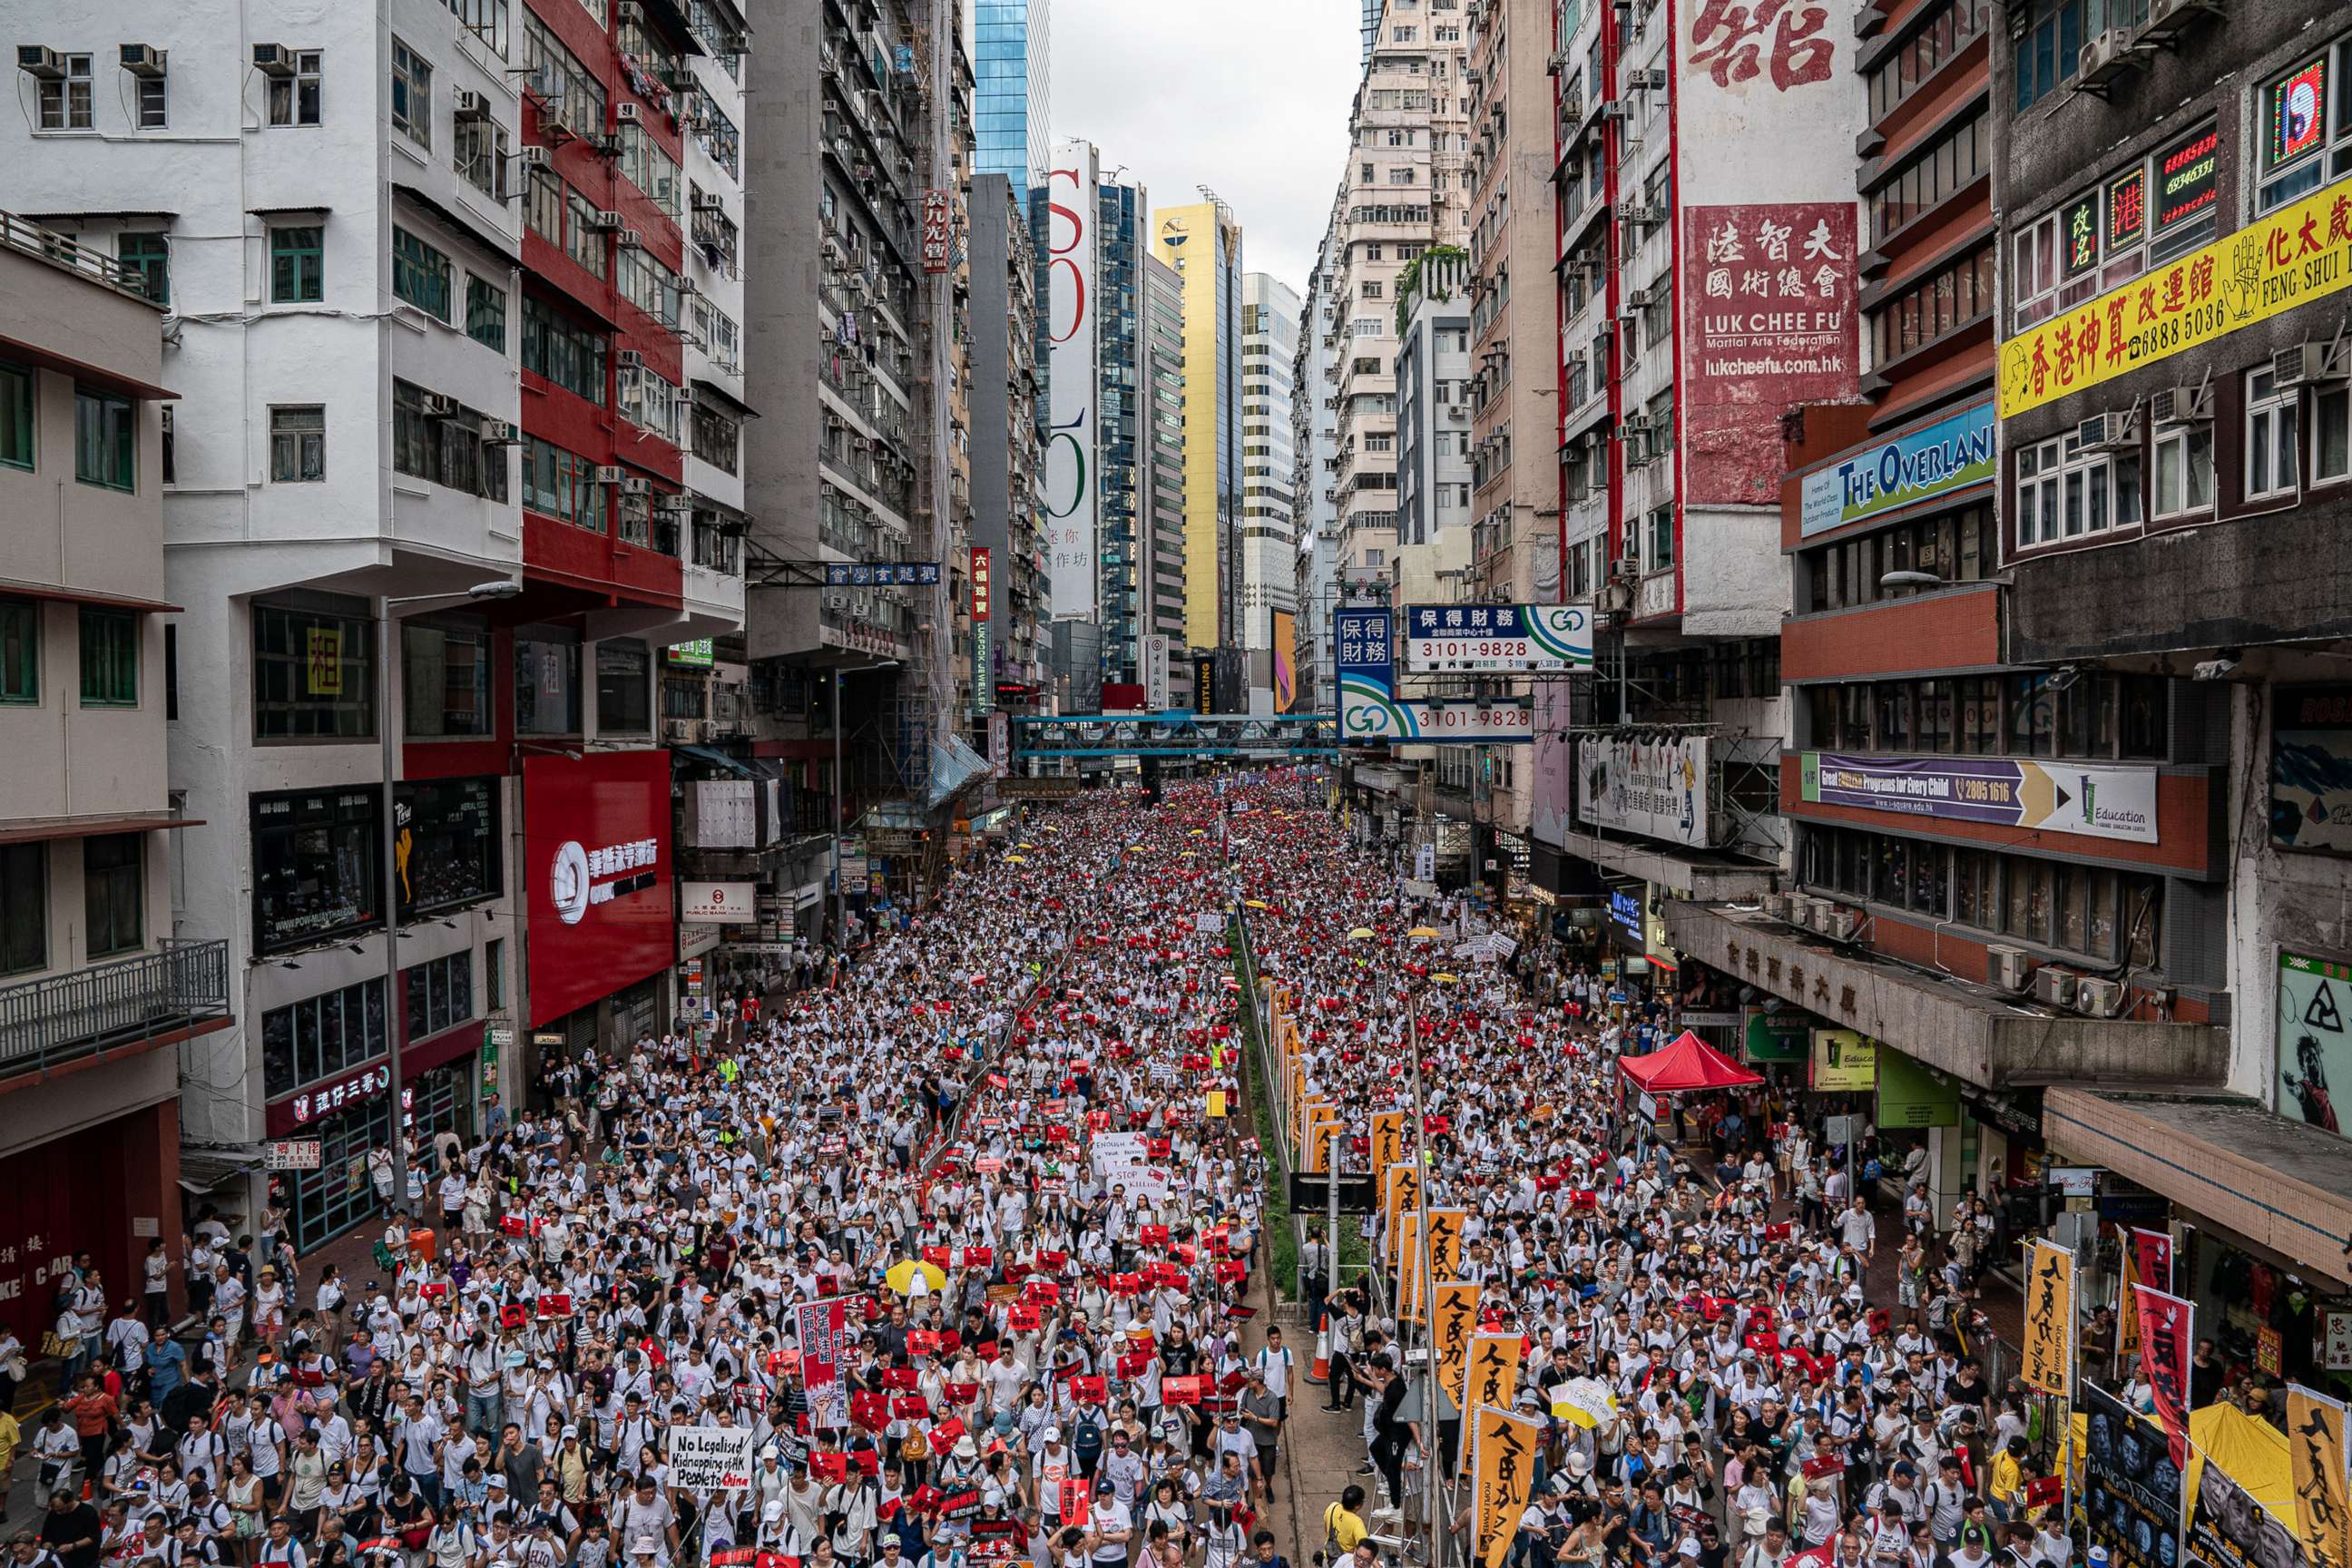 PHOTO: Protesters march on a street during a rally against the extradition law proposal, June 9, 2019, in Hong Kong.